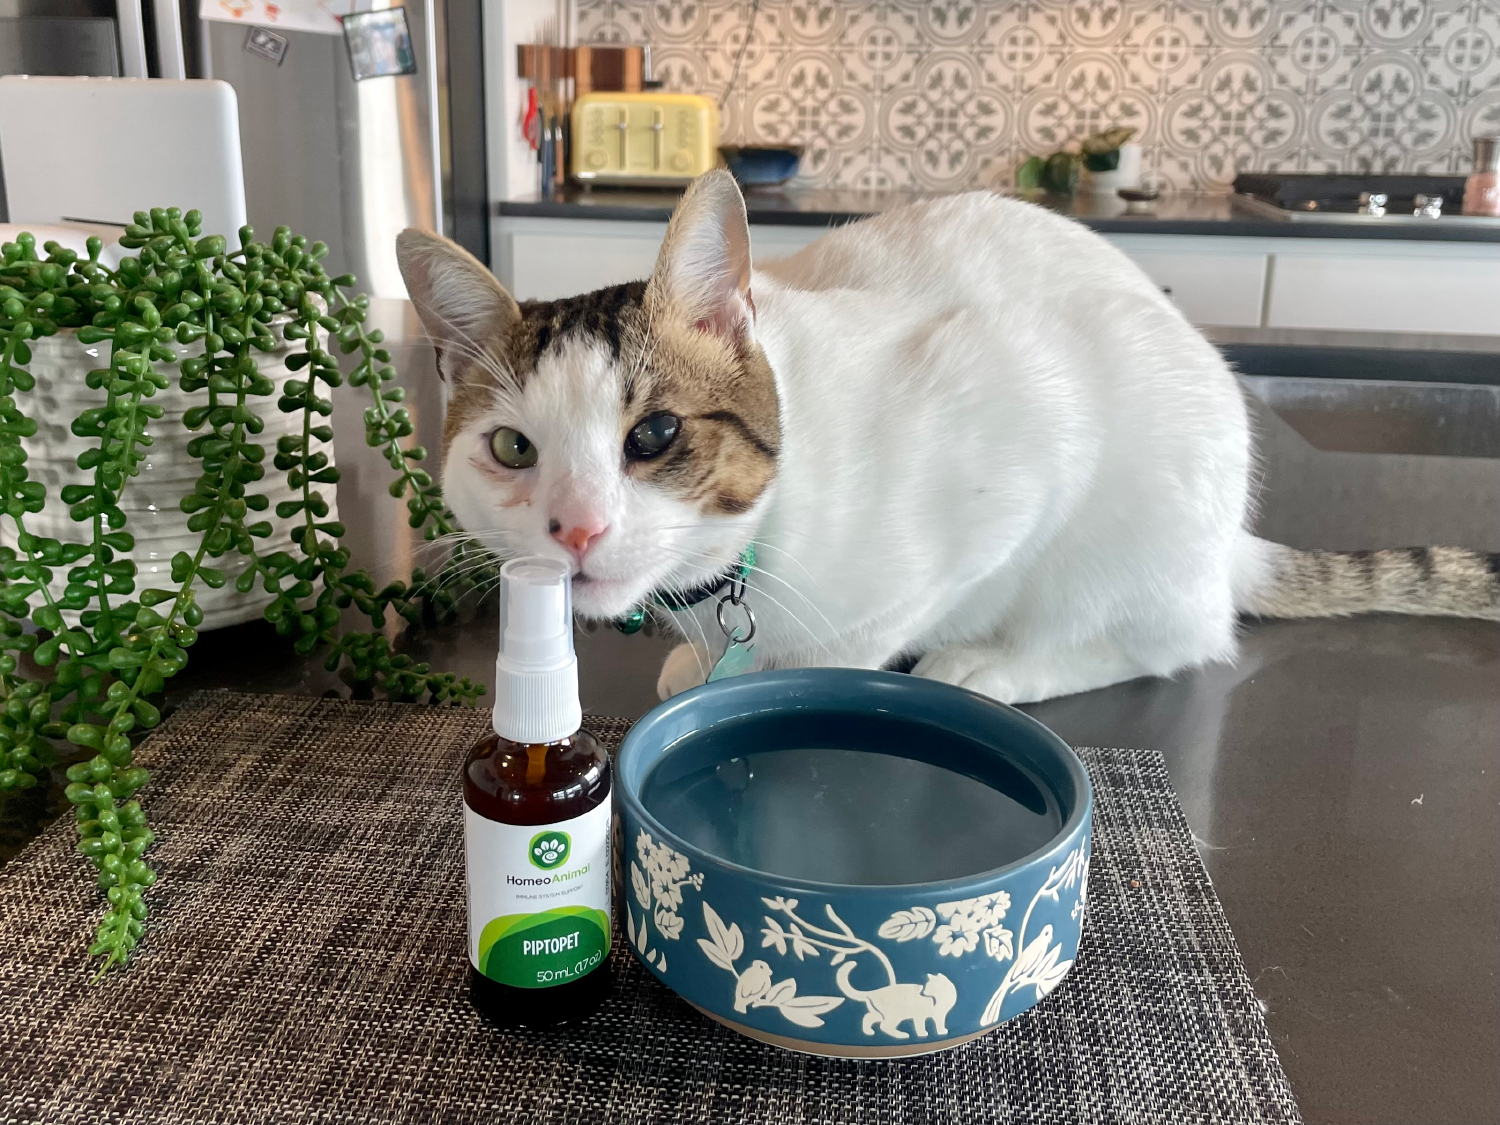 Zumalka Cat Supplement - makoa with piptopet and water bowl